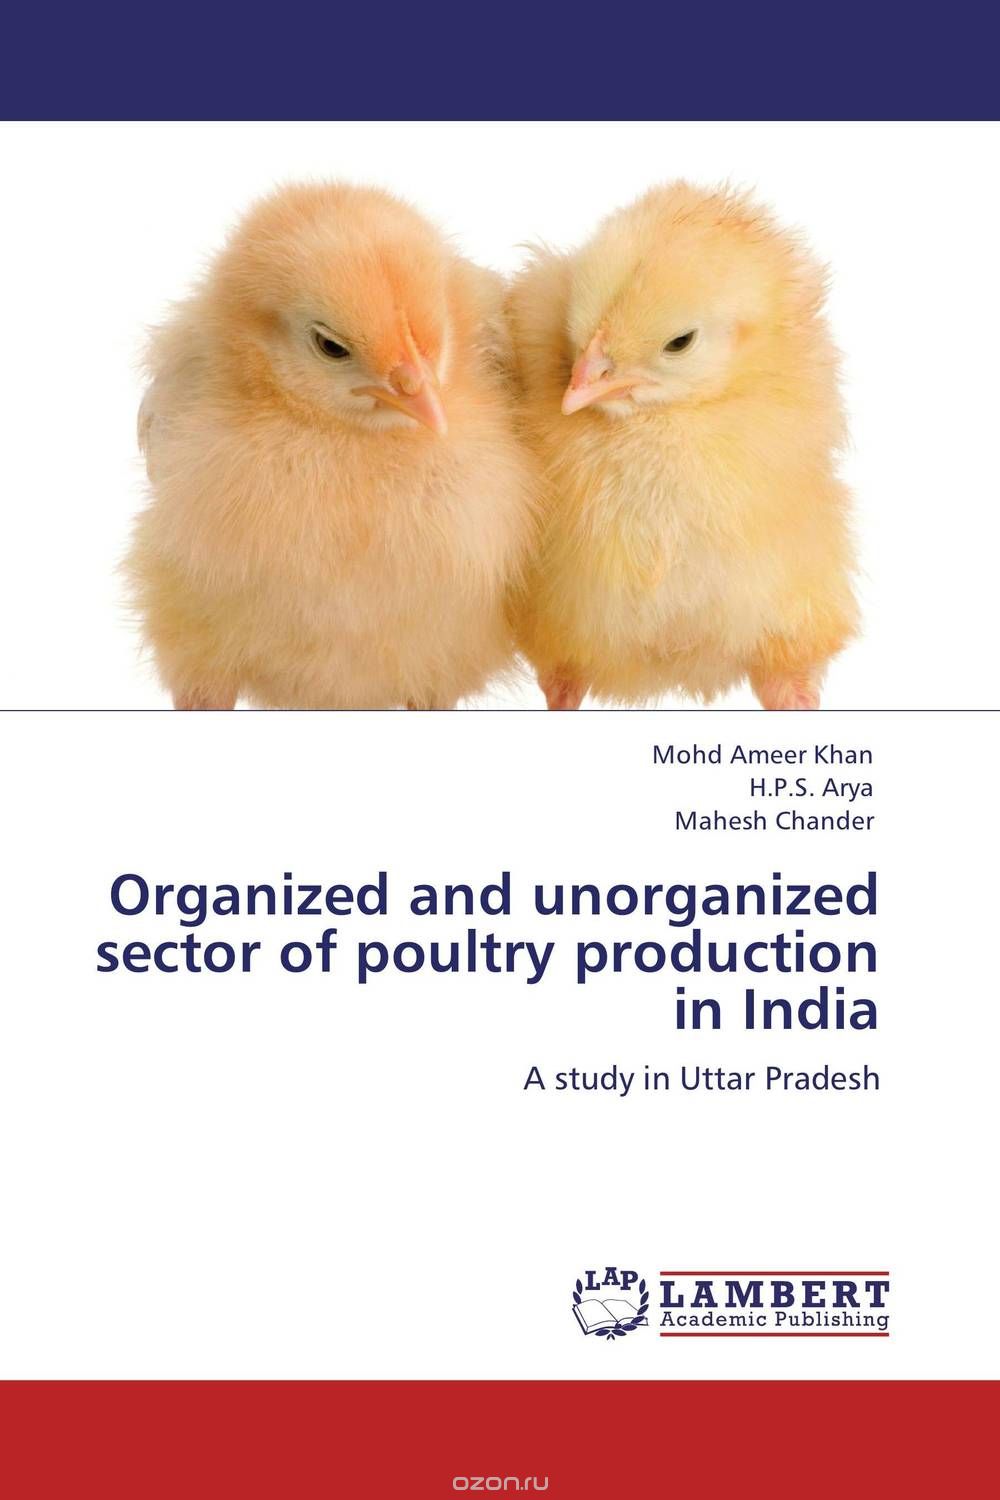 Скачать книгу "Organized and unorganized sector of  poultry production in India"